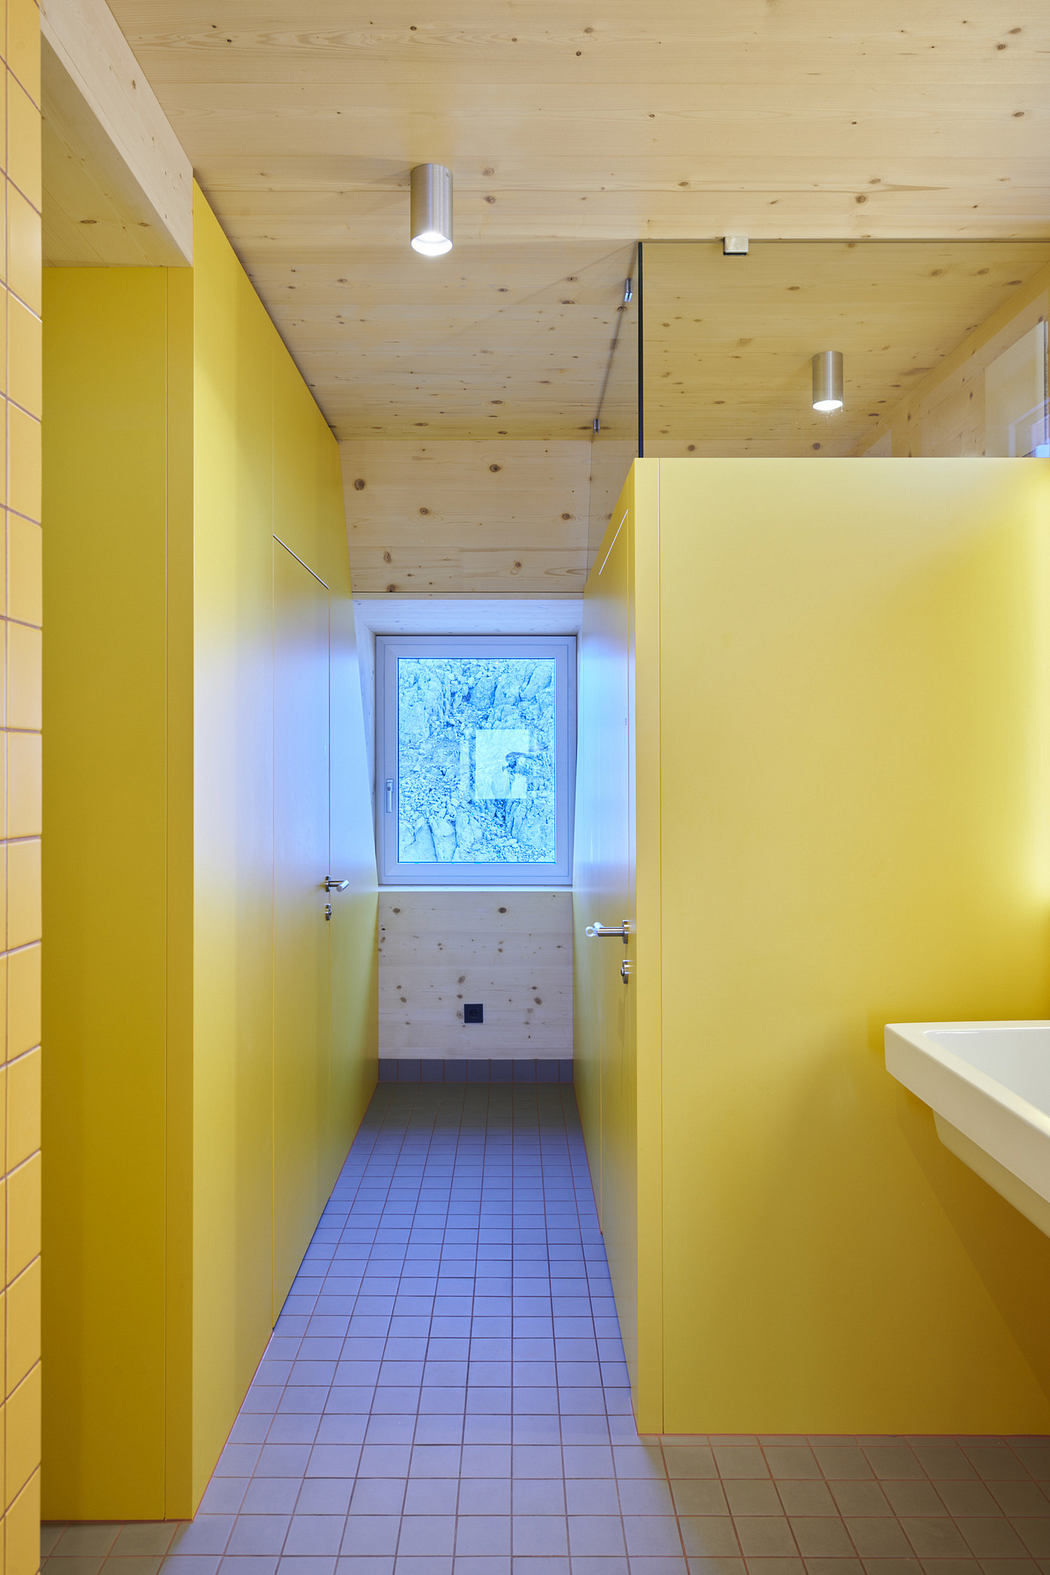 Bright yellow bathroom with wooden ceiling and minimalist design.